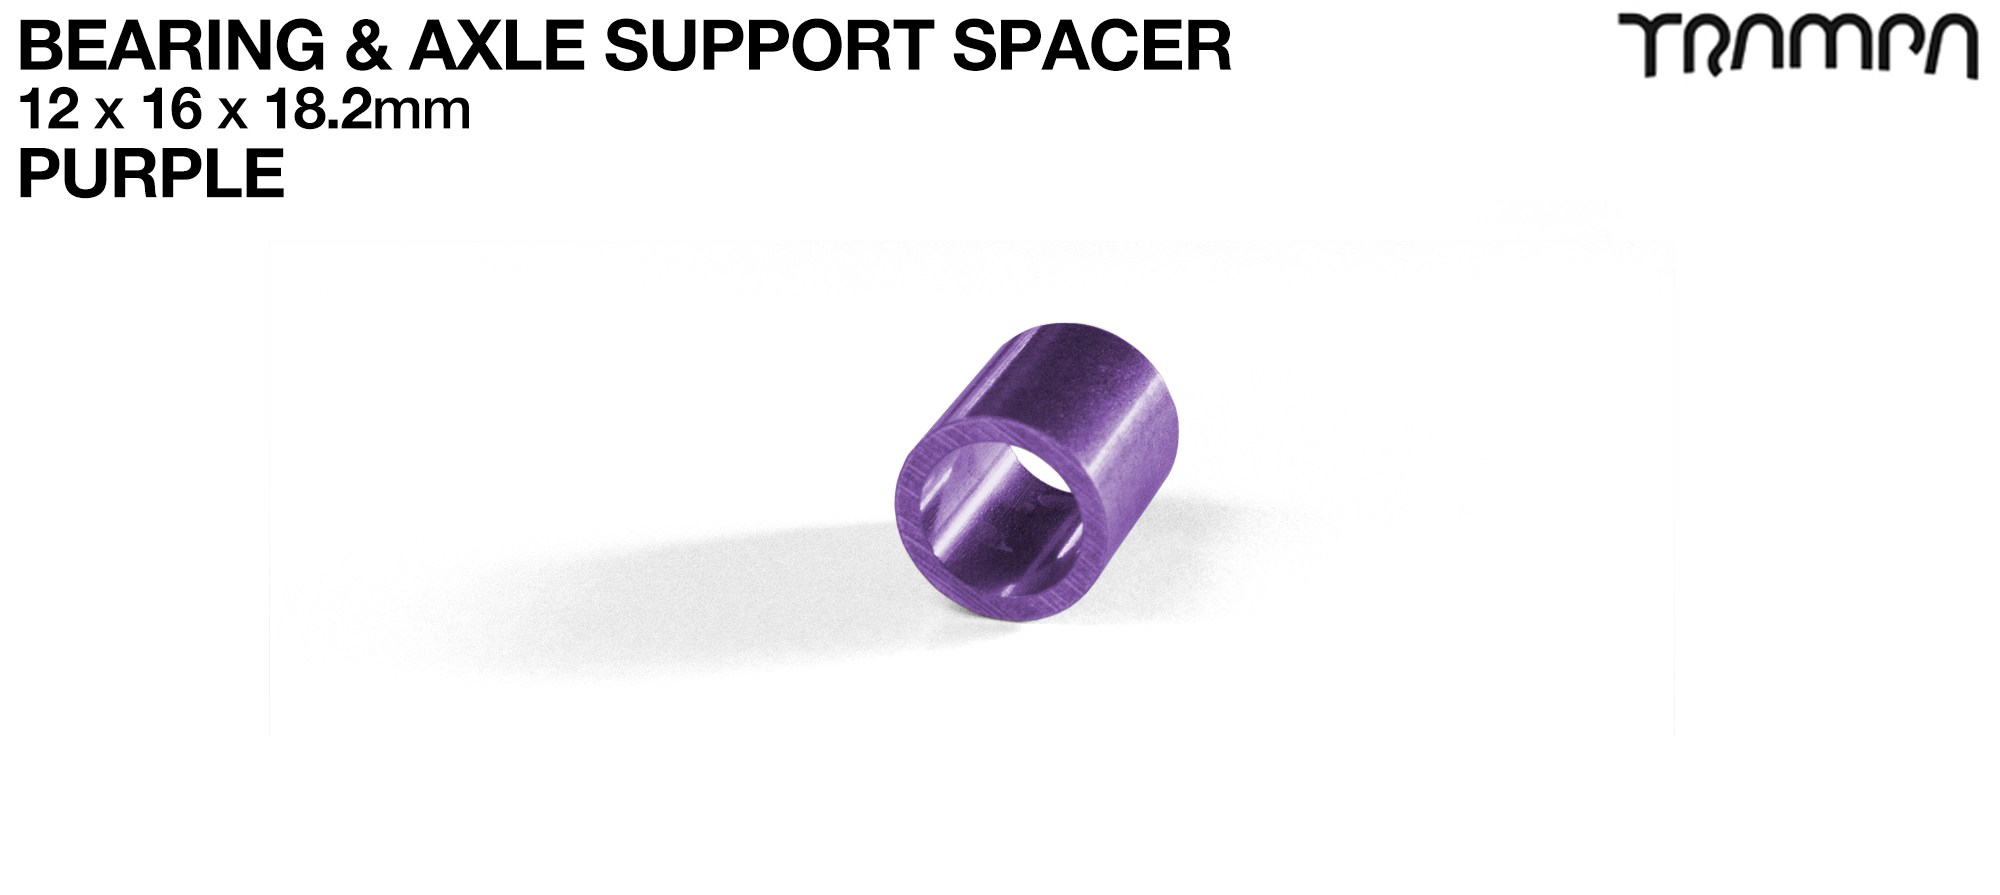 18.2mm Wheel Support Axle Spacers - PURPLE x2